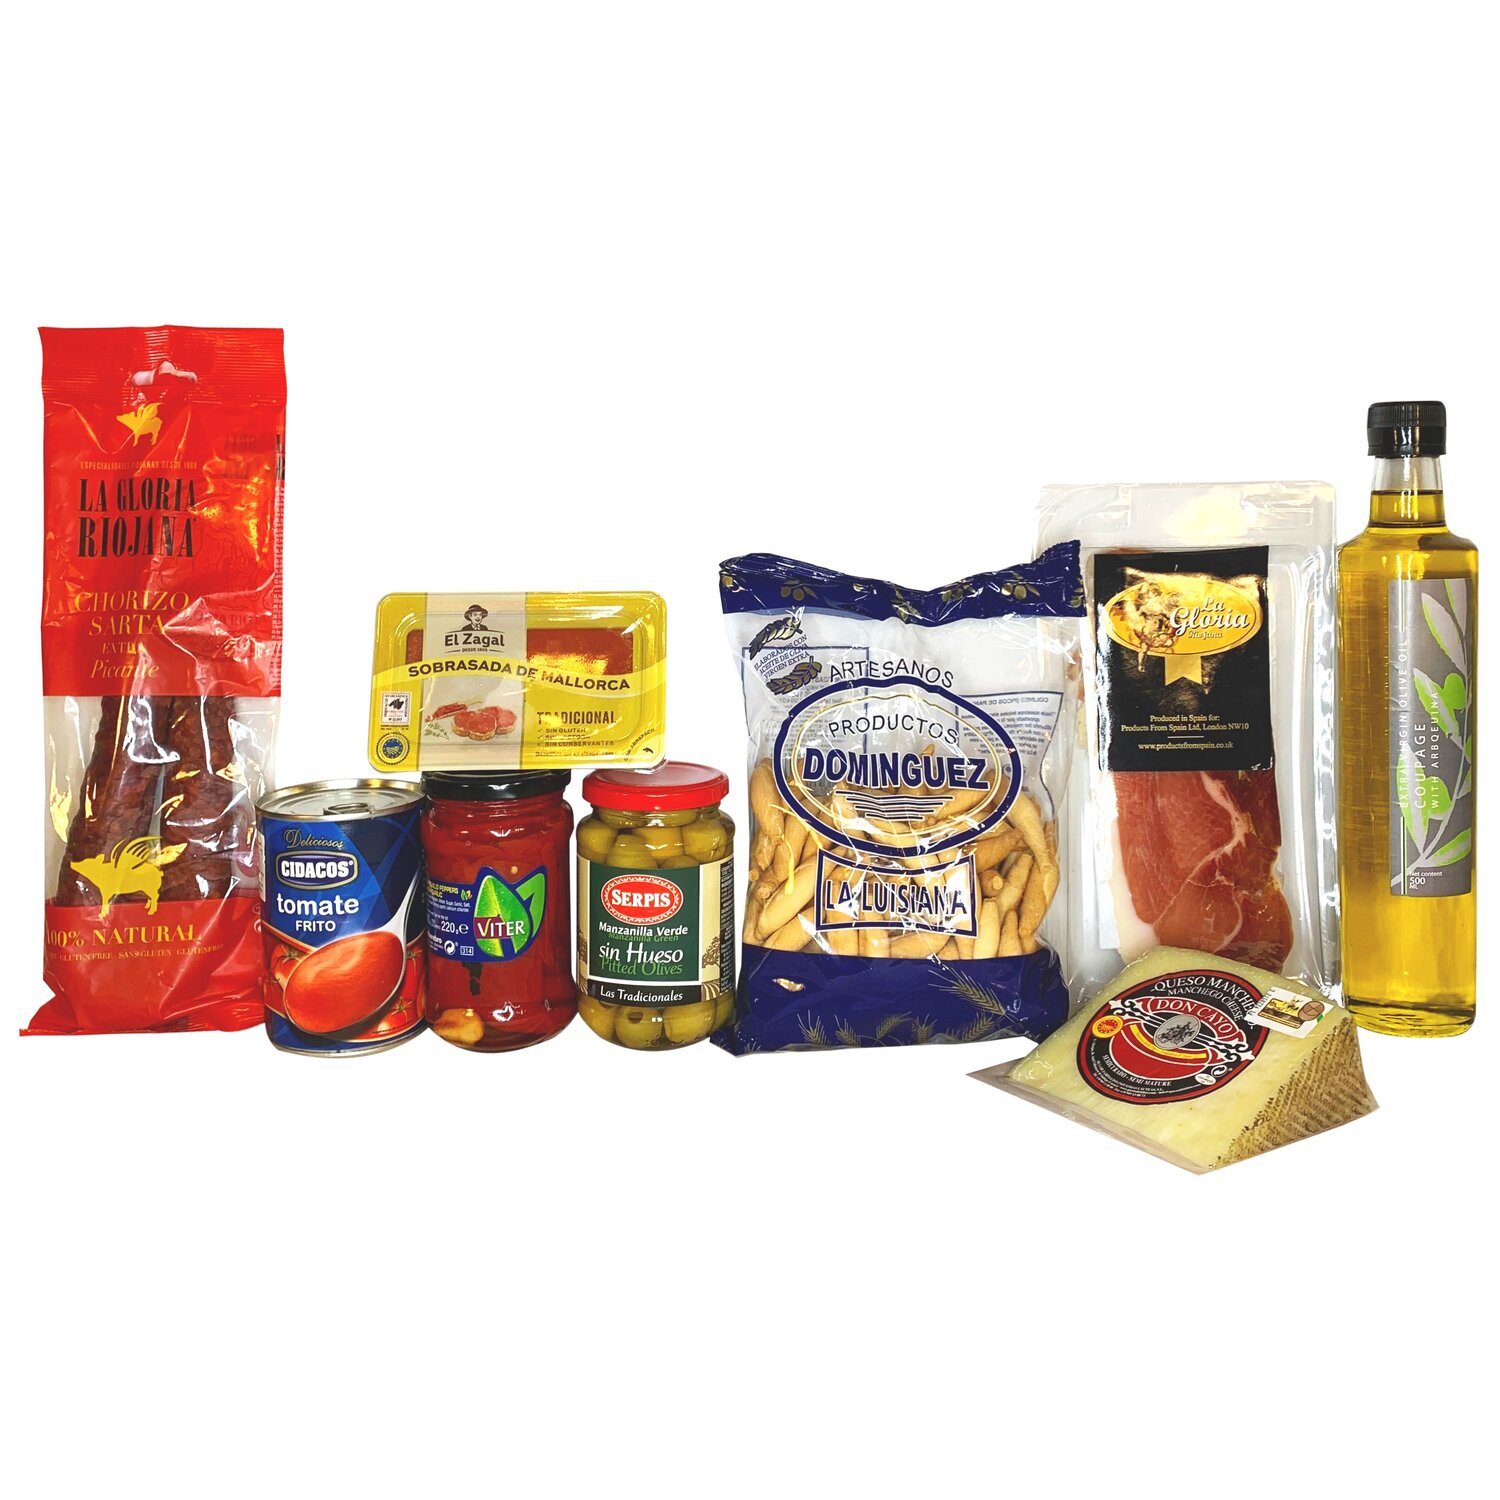 selectSpanish online grocery store ion